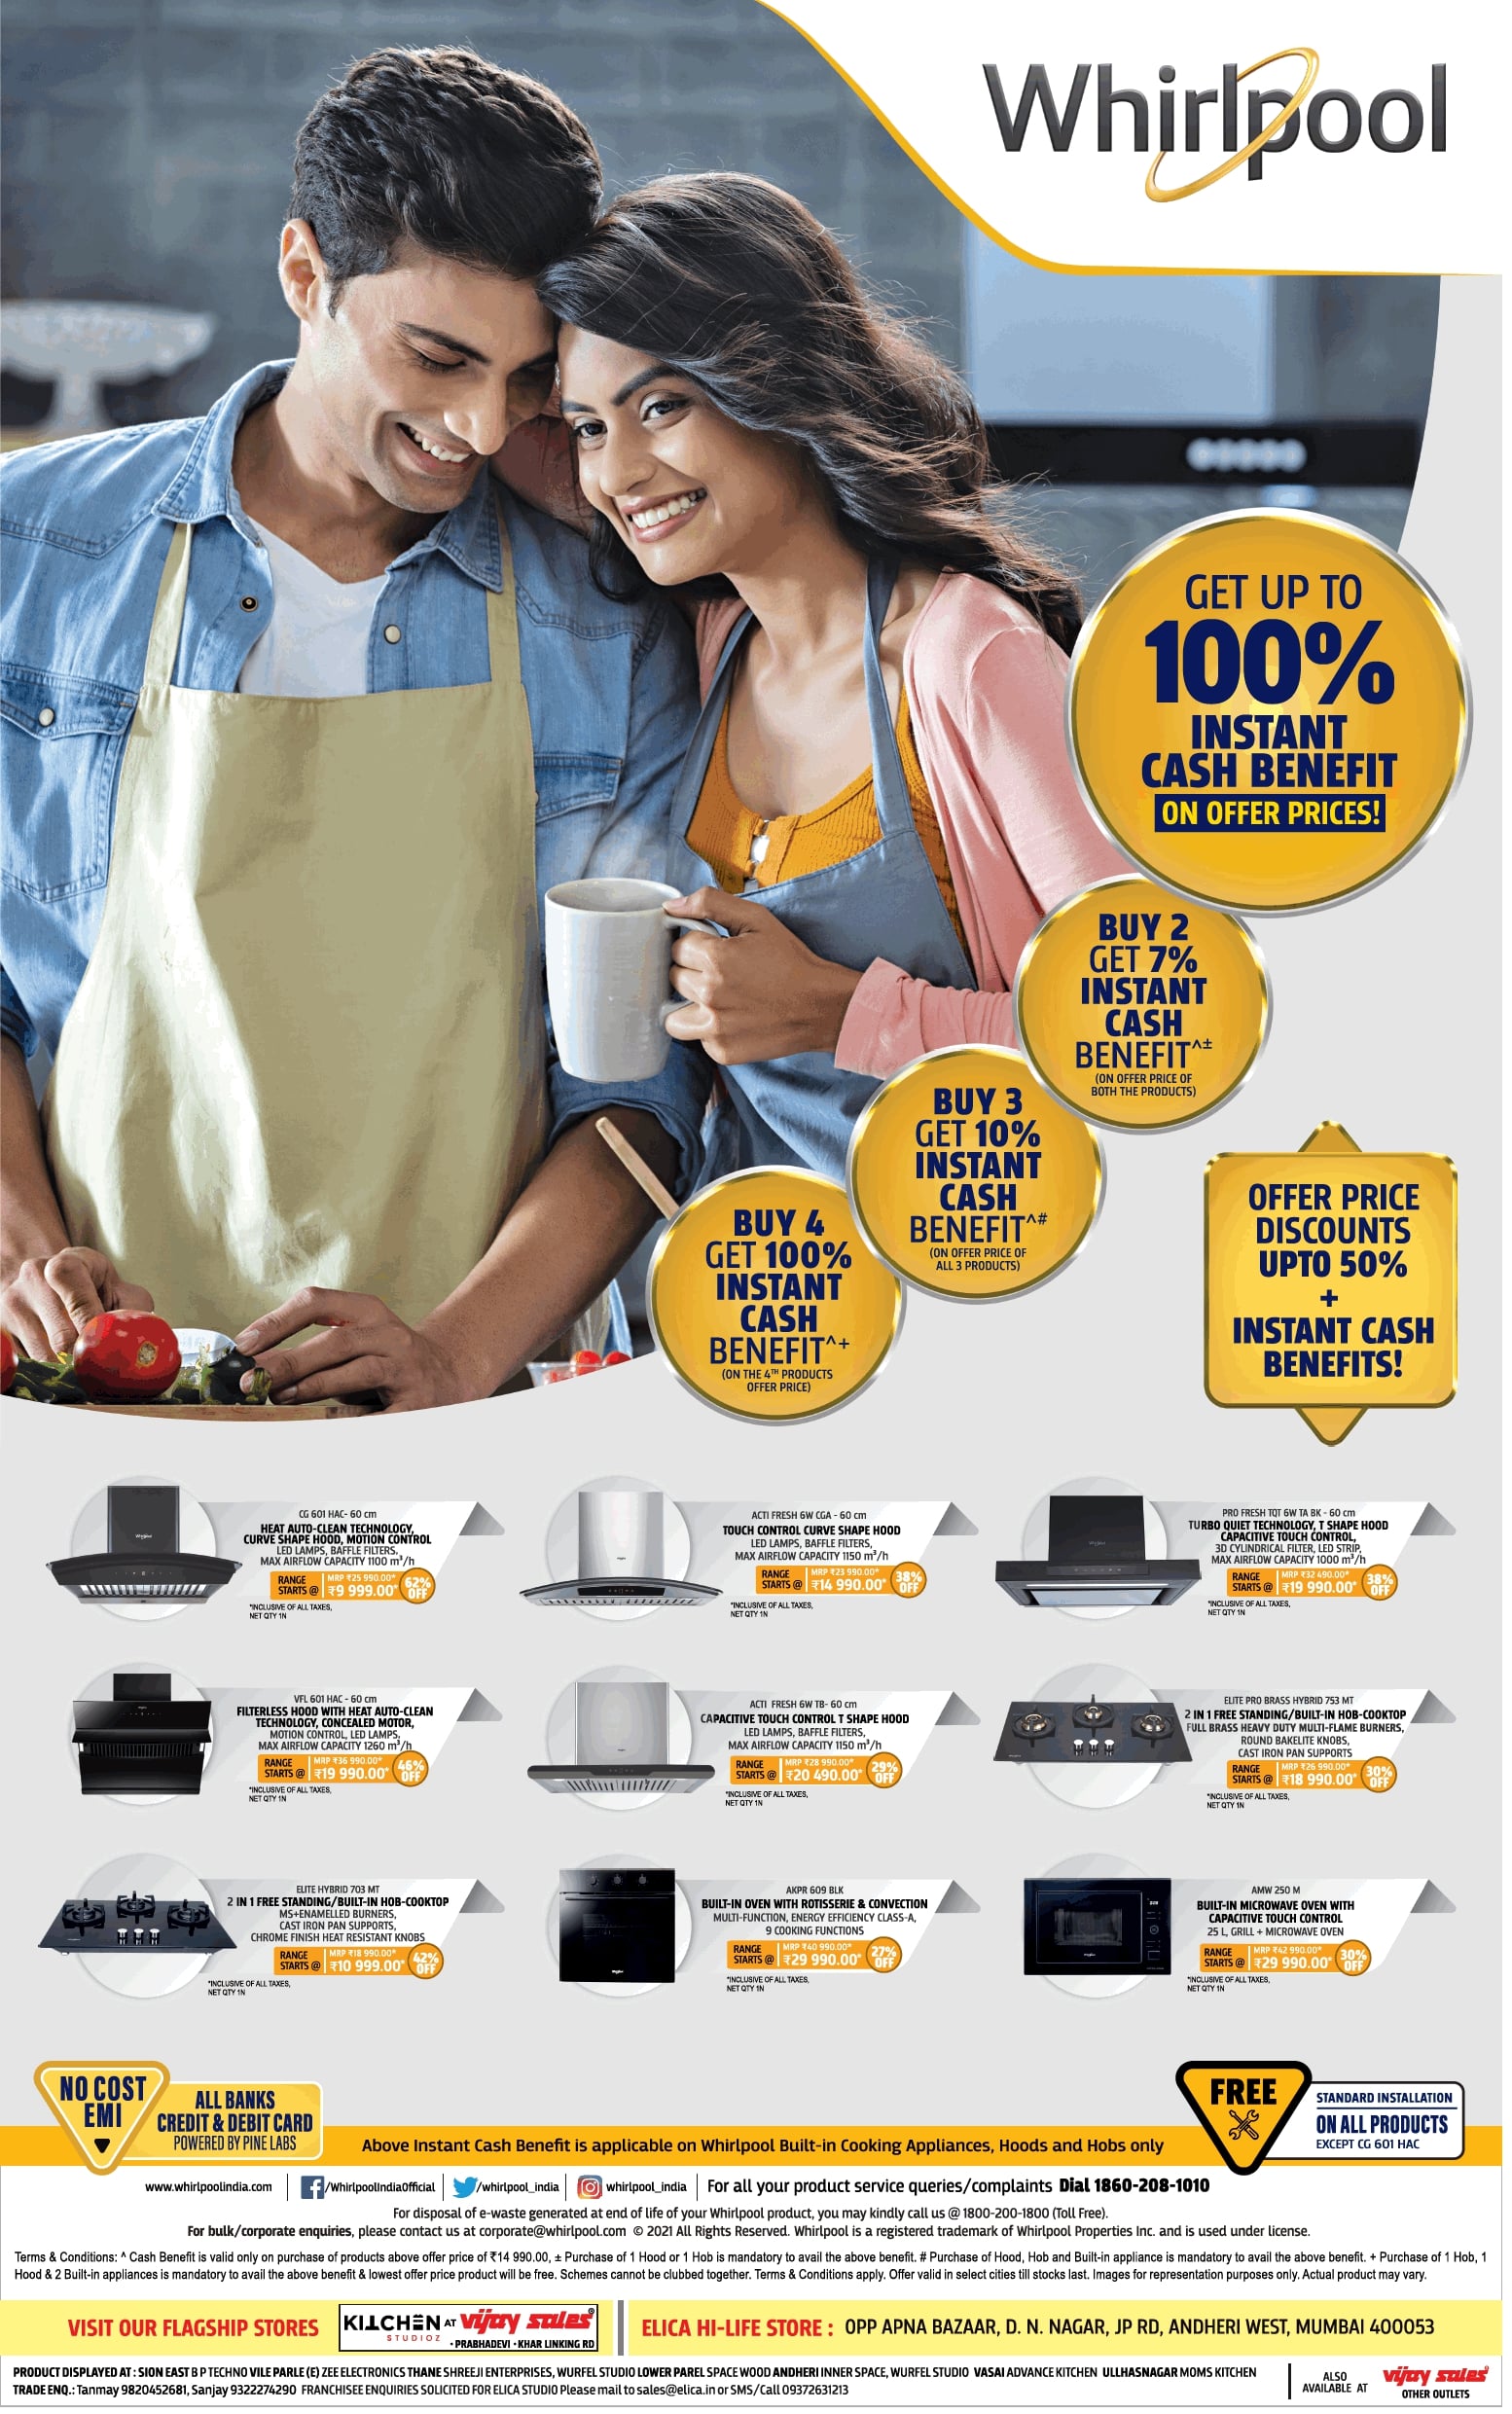 whirlpool-get-up-to-100-percent-instant-cash-benefit-on-offer-prices-ad-bombay-times-05-06-2021